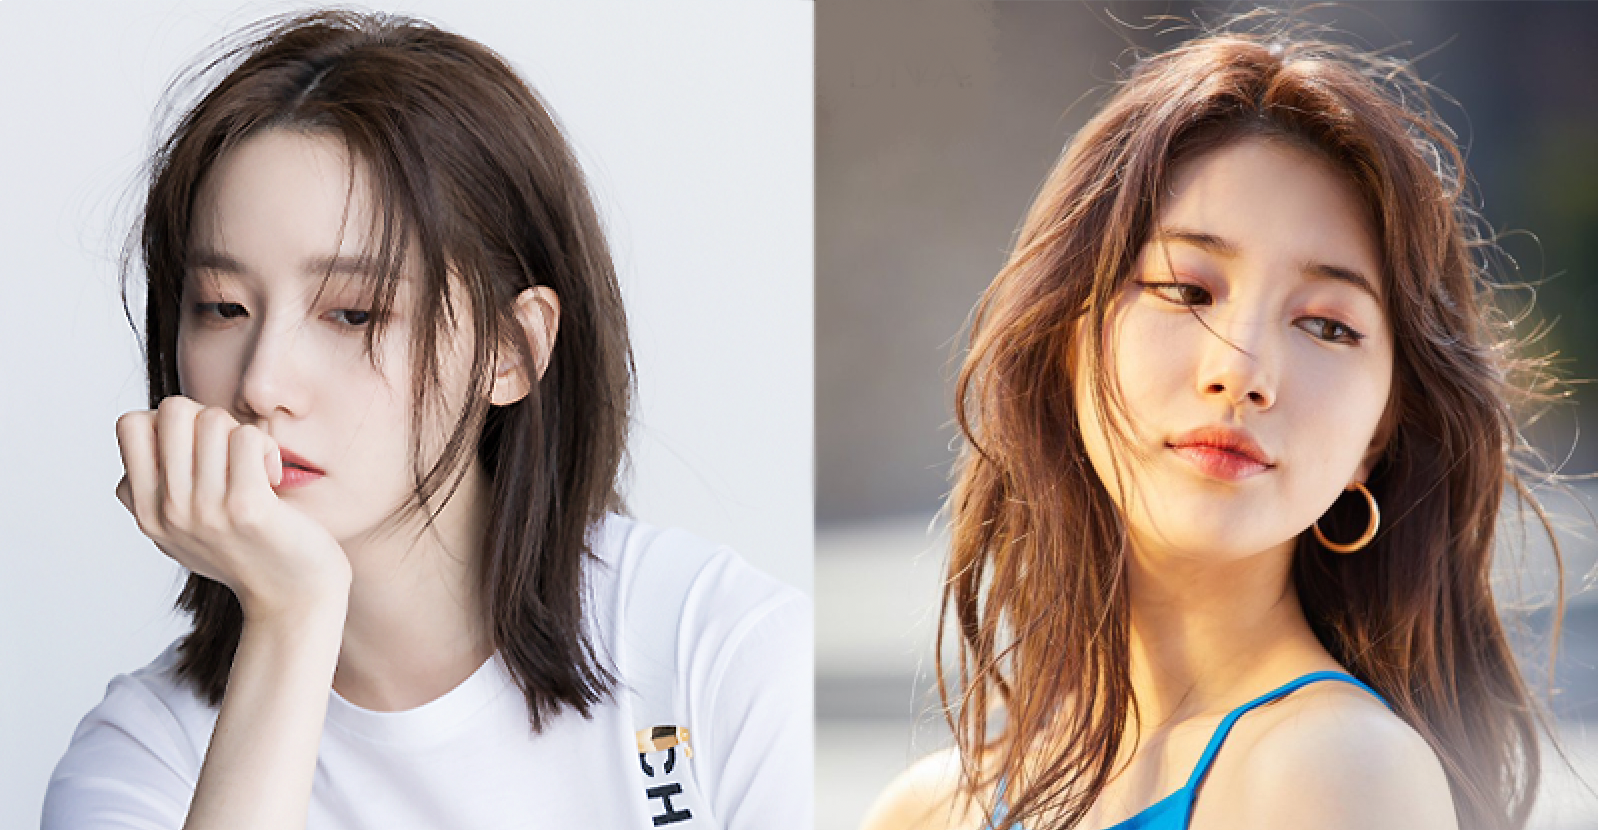 Netizens compare the visuals of the female idols from SM and JYP